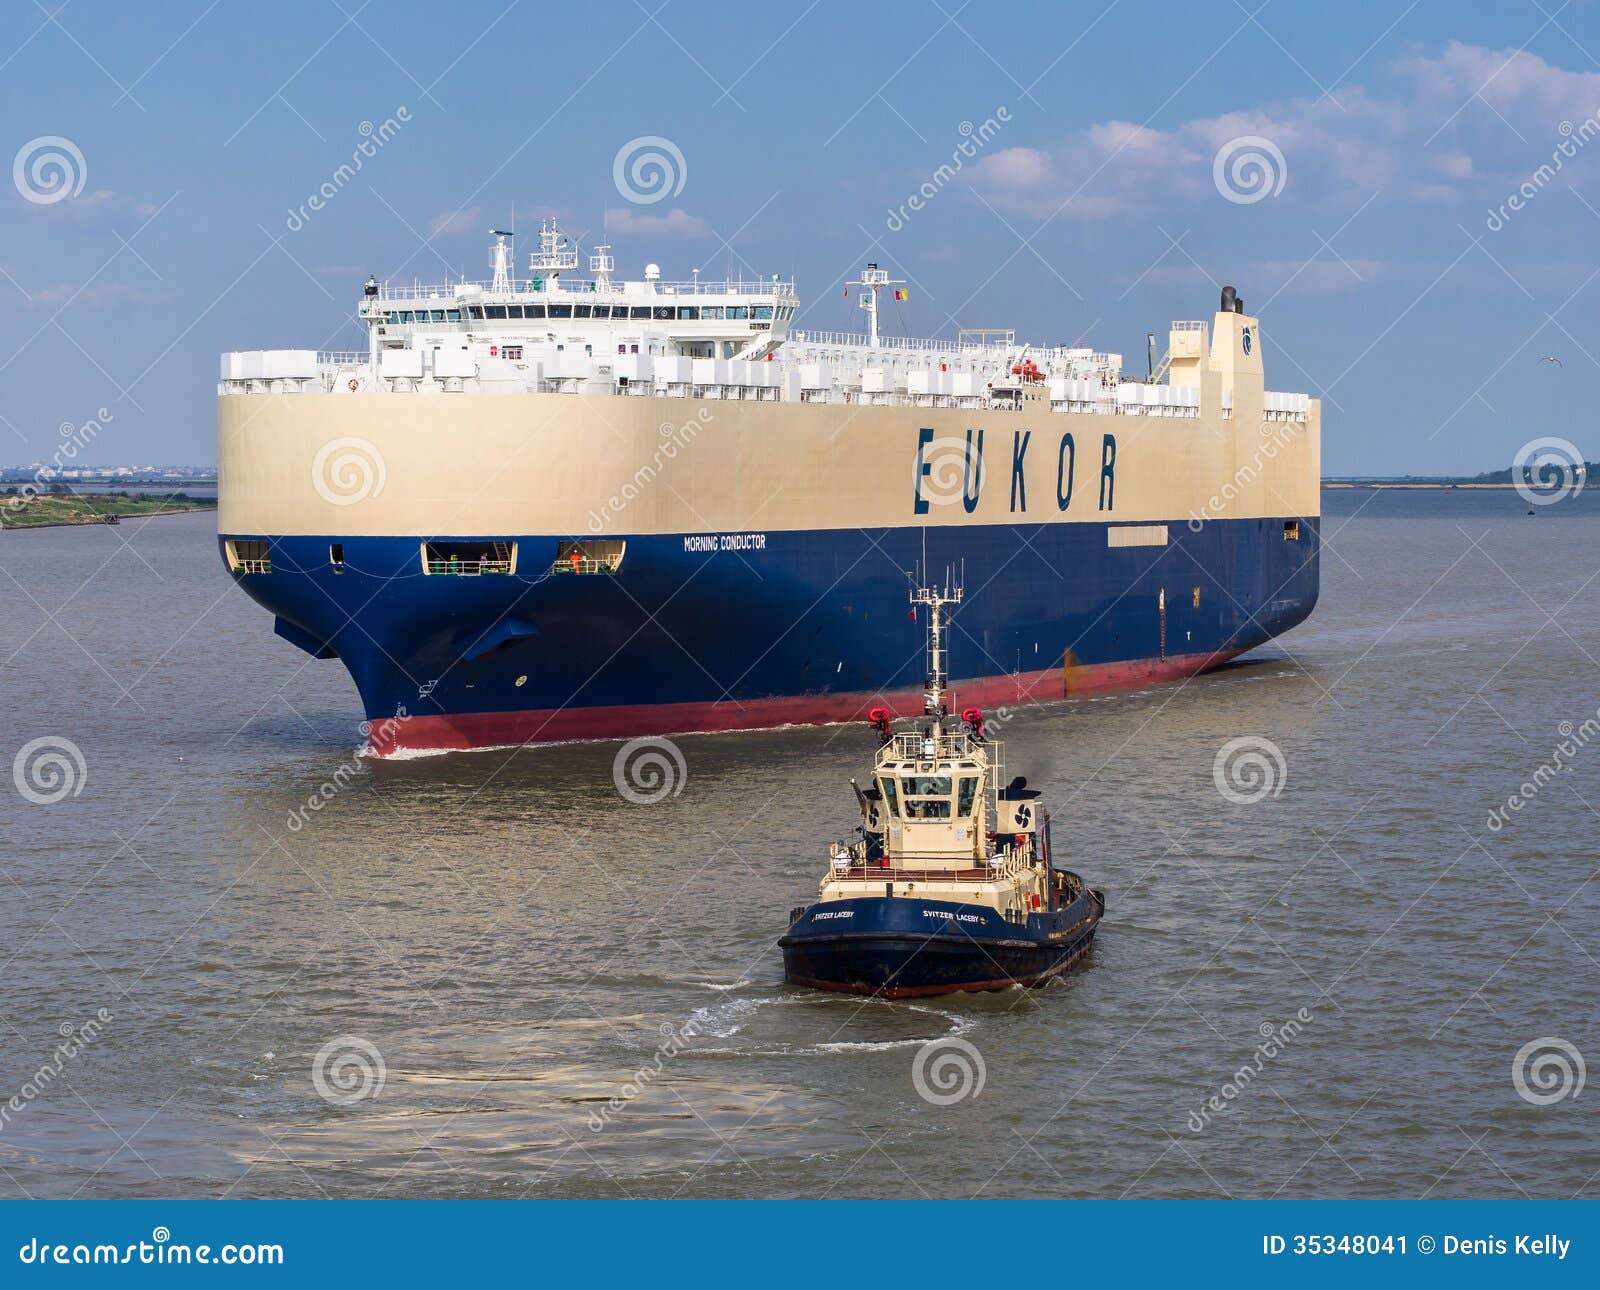 Car Carrier Ship And Tug Boat Editorial Photo - Image ...